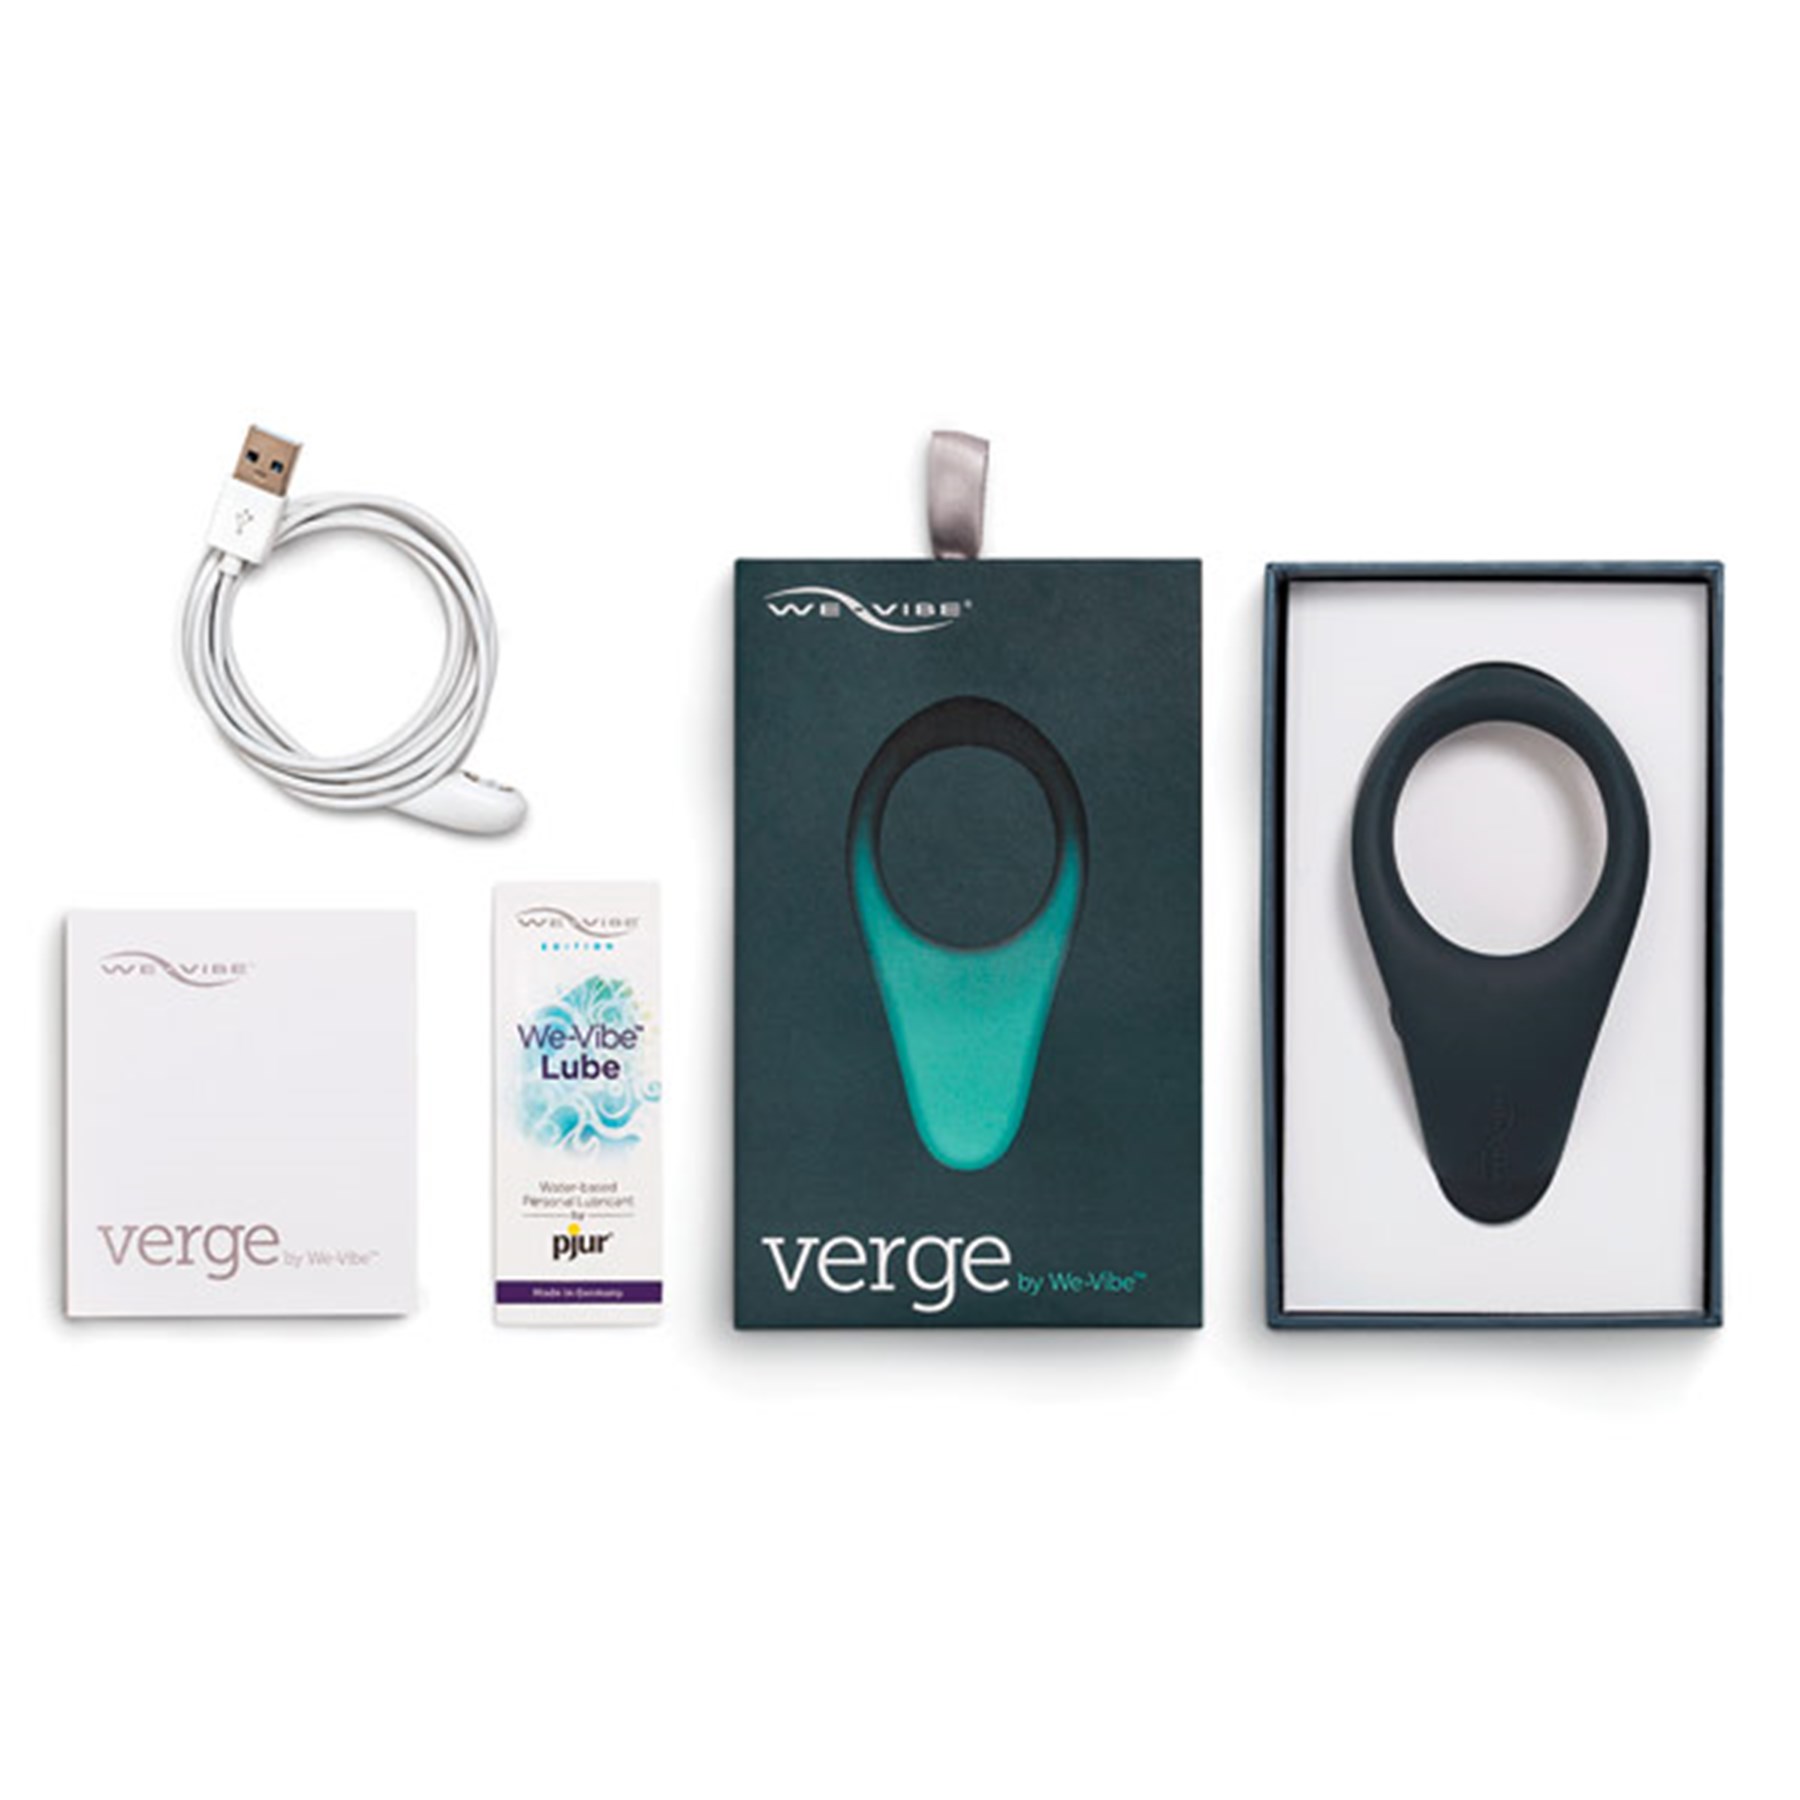 Verge By We-Vibe Vibrating Ring inside box